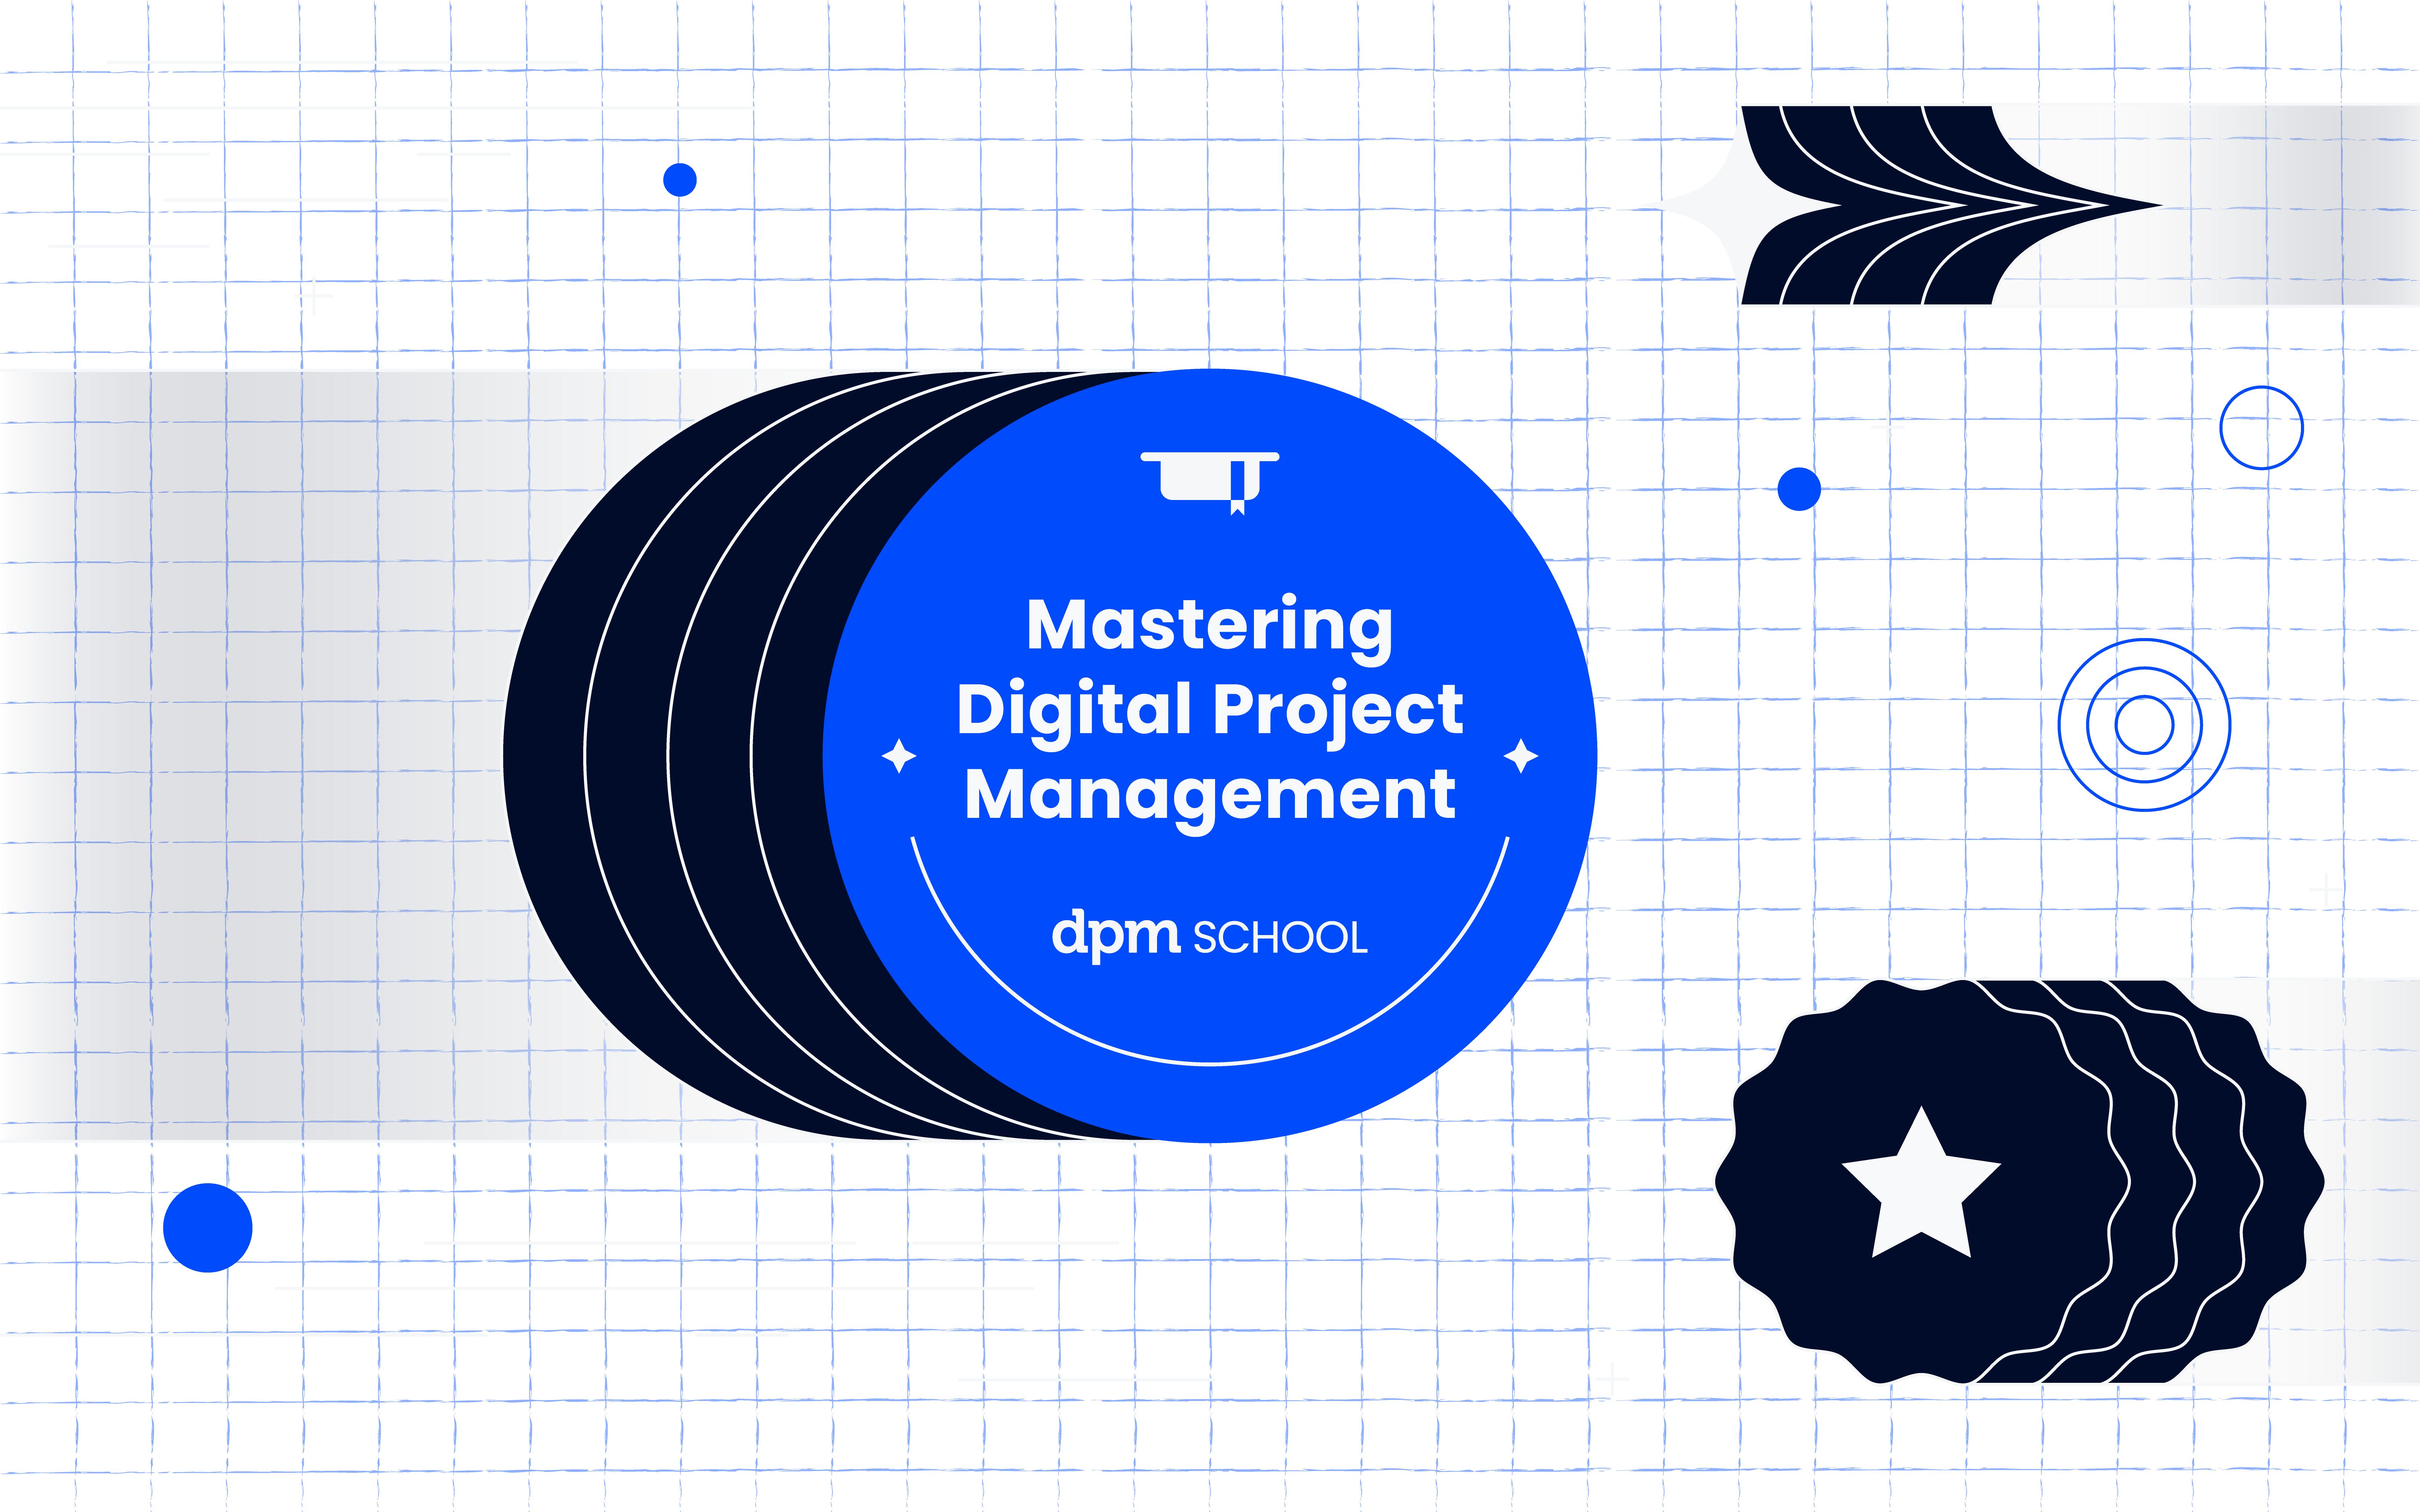 Mastering Digital Project Management from The DPM School